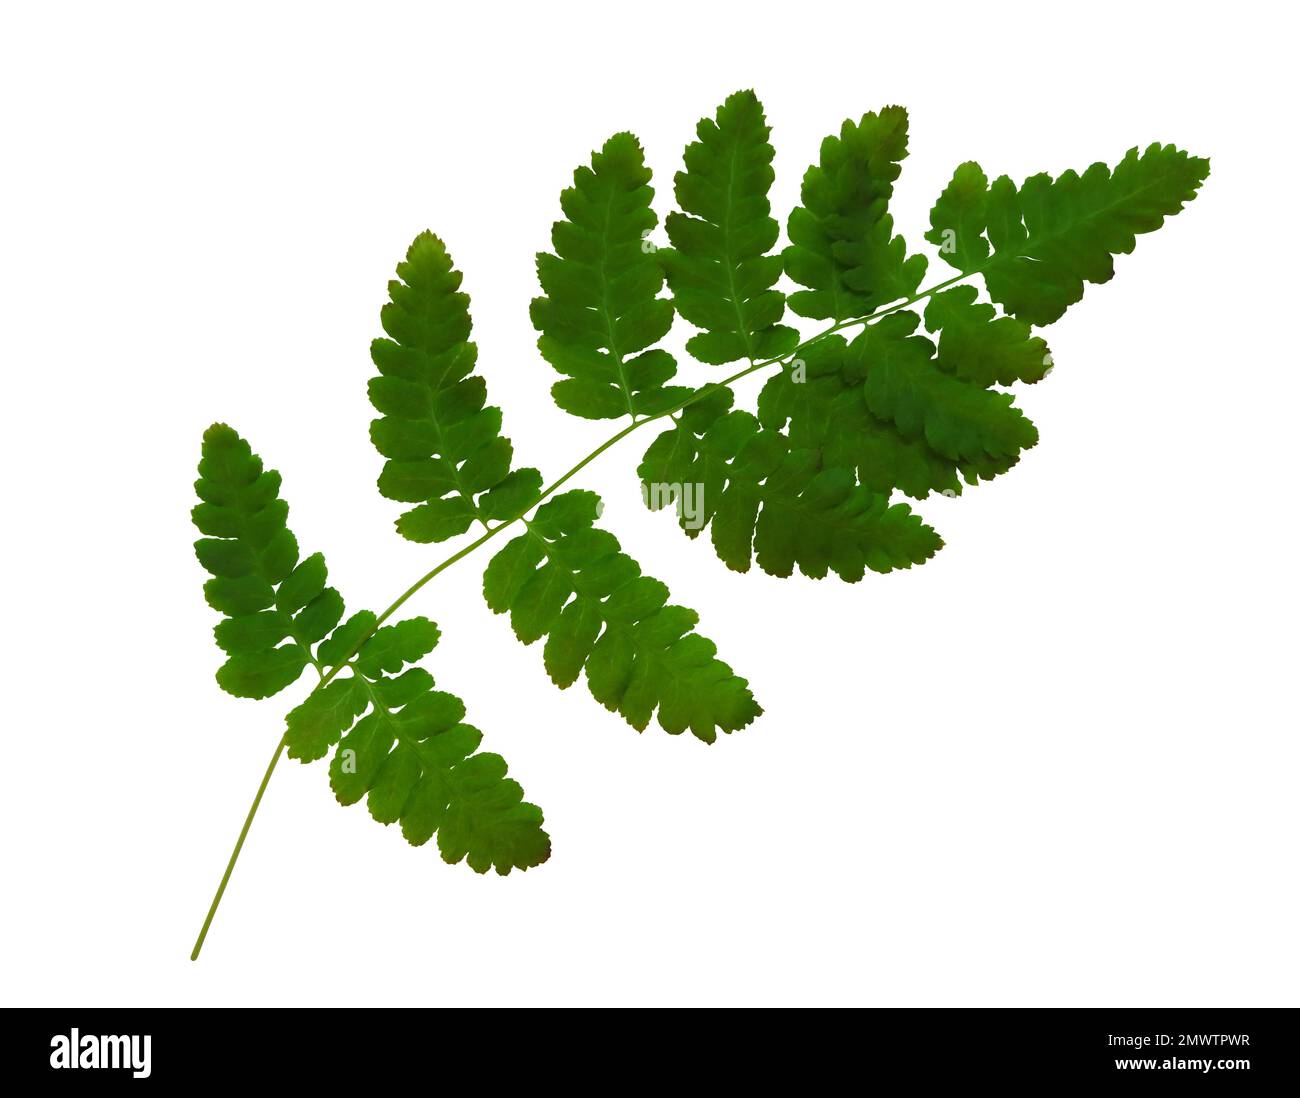 Fern branch isolated on white background. Clipping Path included. Stock Photo